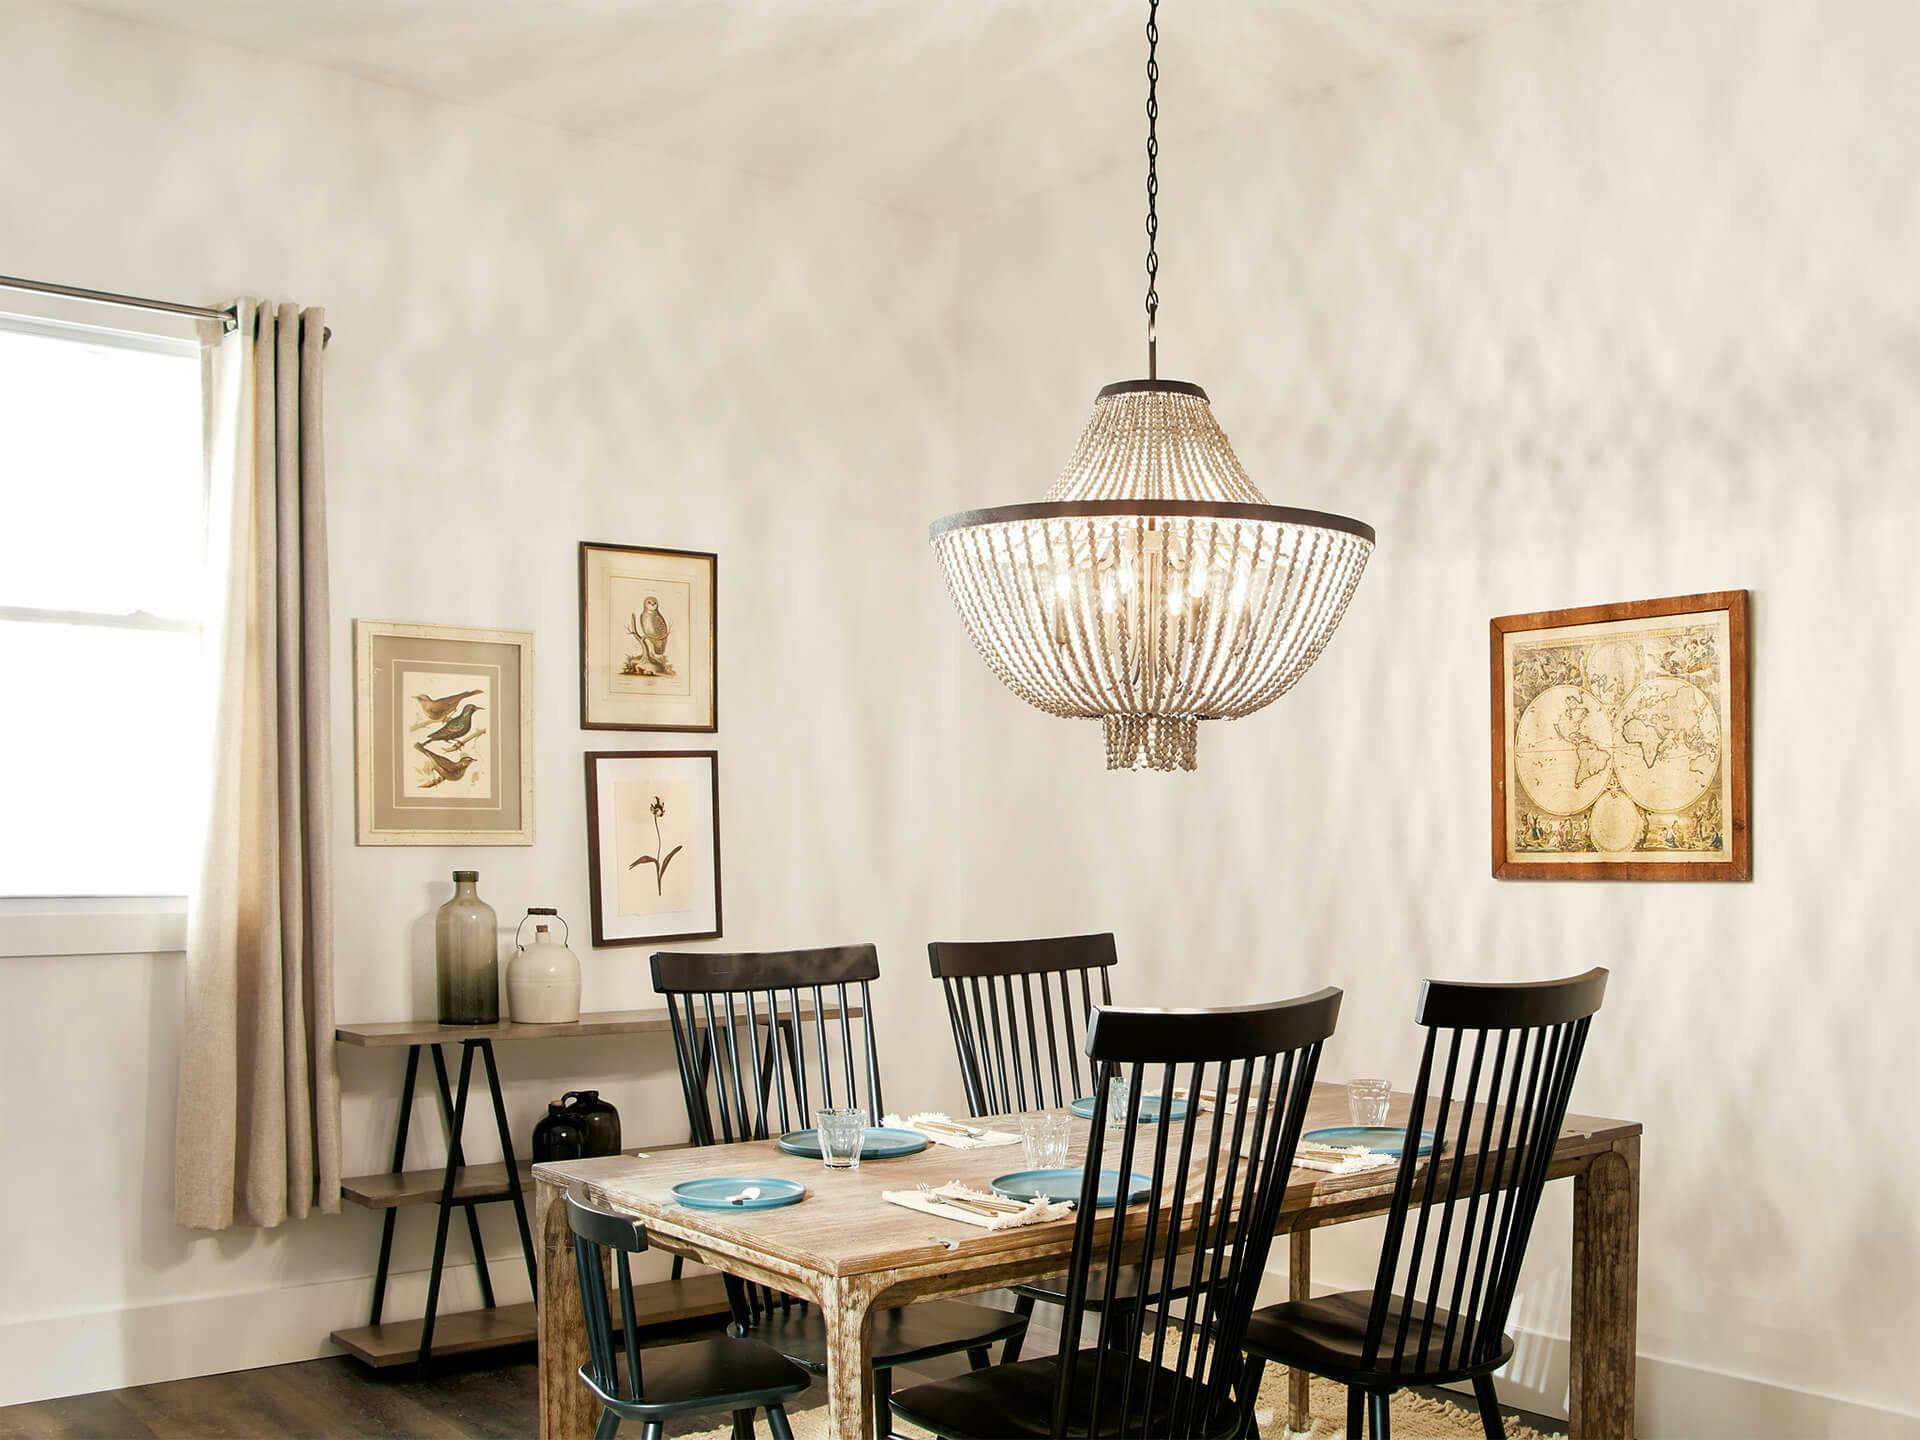 Dining room with a Brisbane chandelier above the table